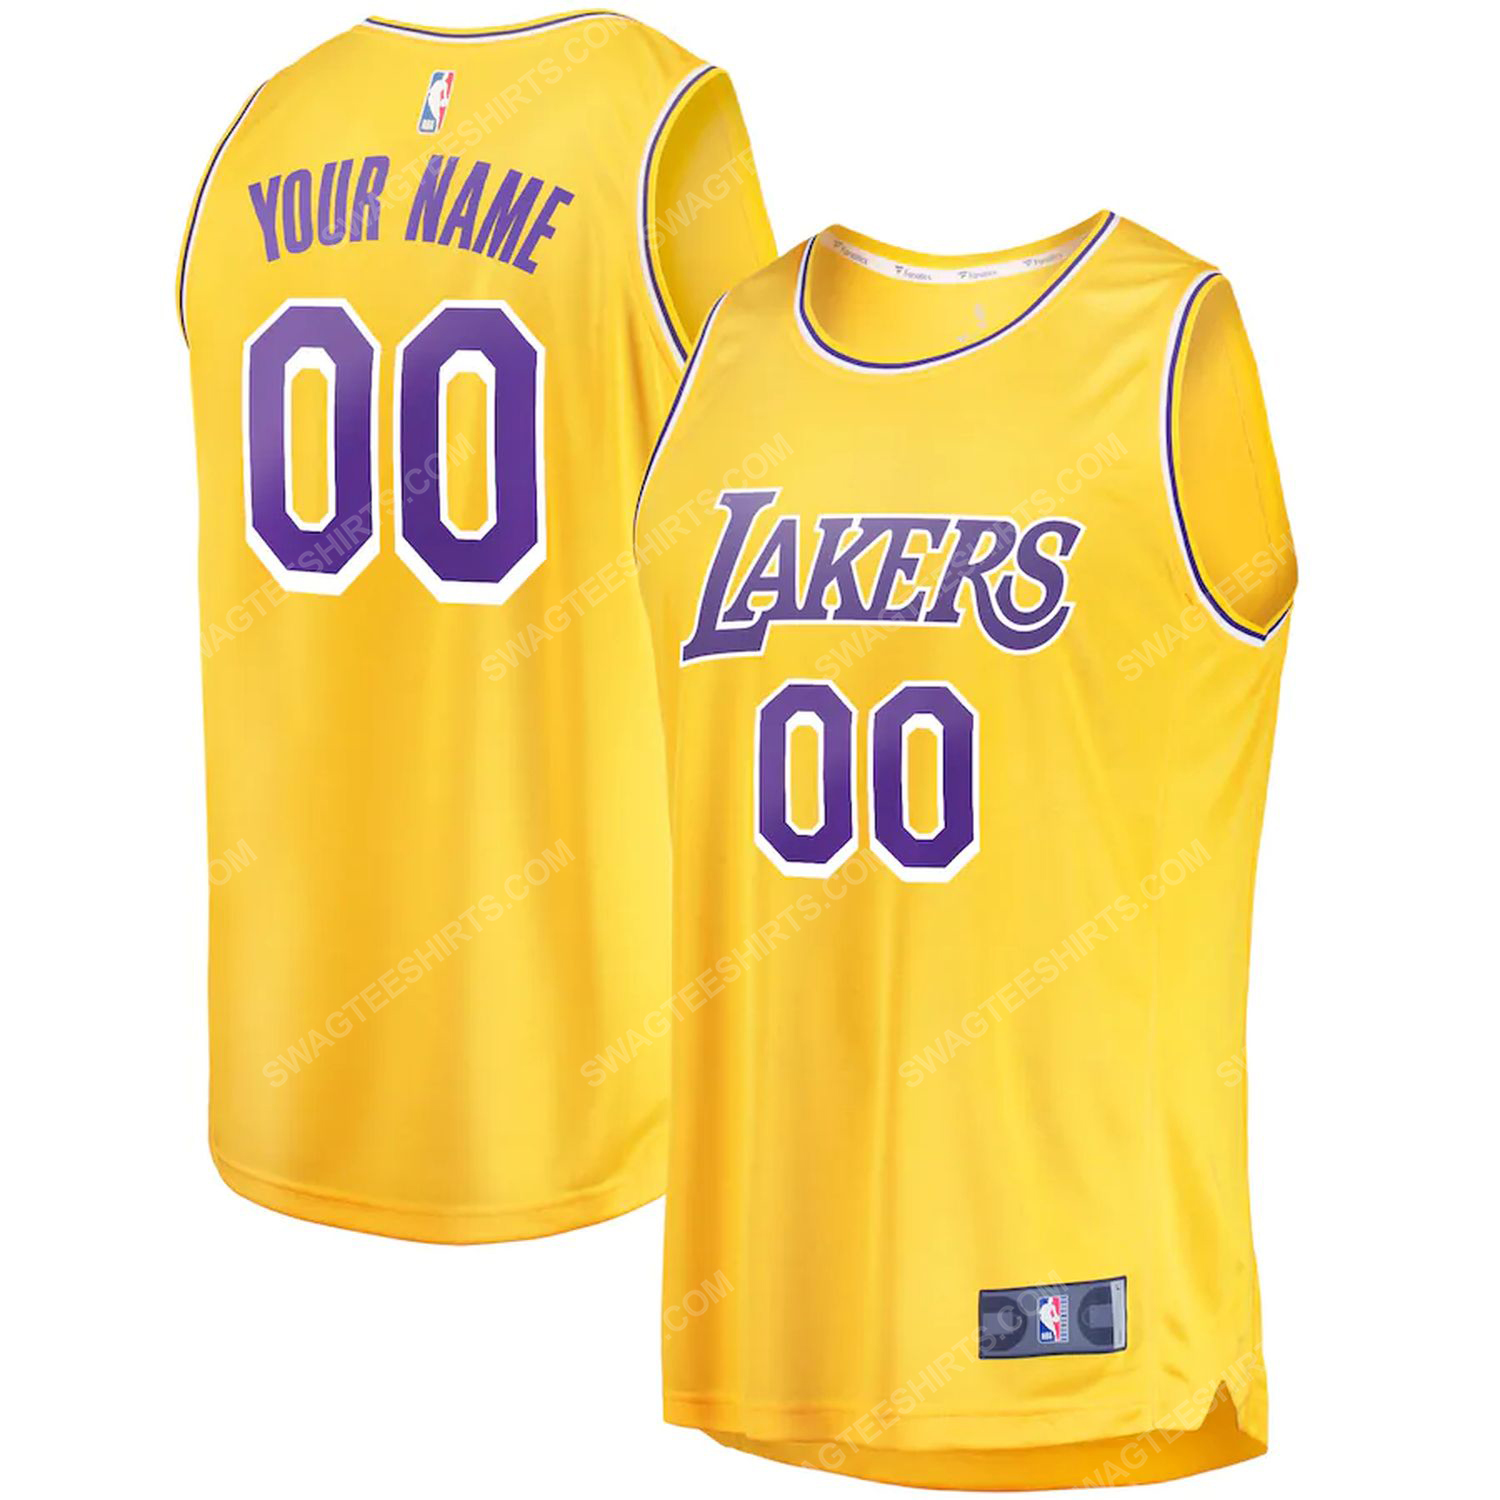 [special edition] Custom nba los angeles lakers team basketball jersey – Maria